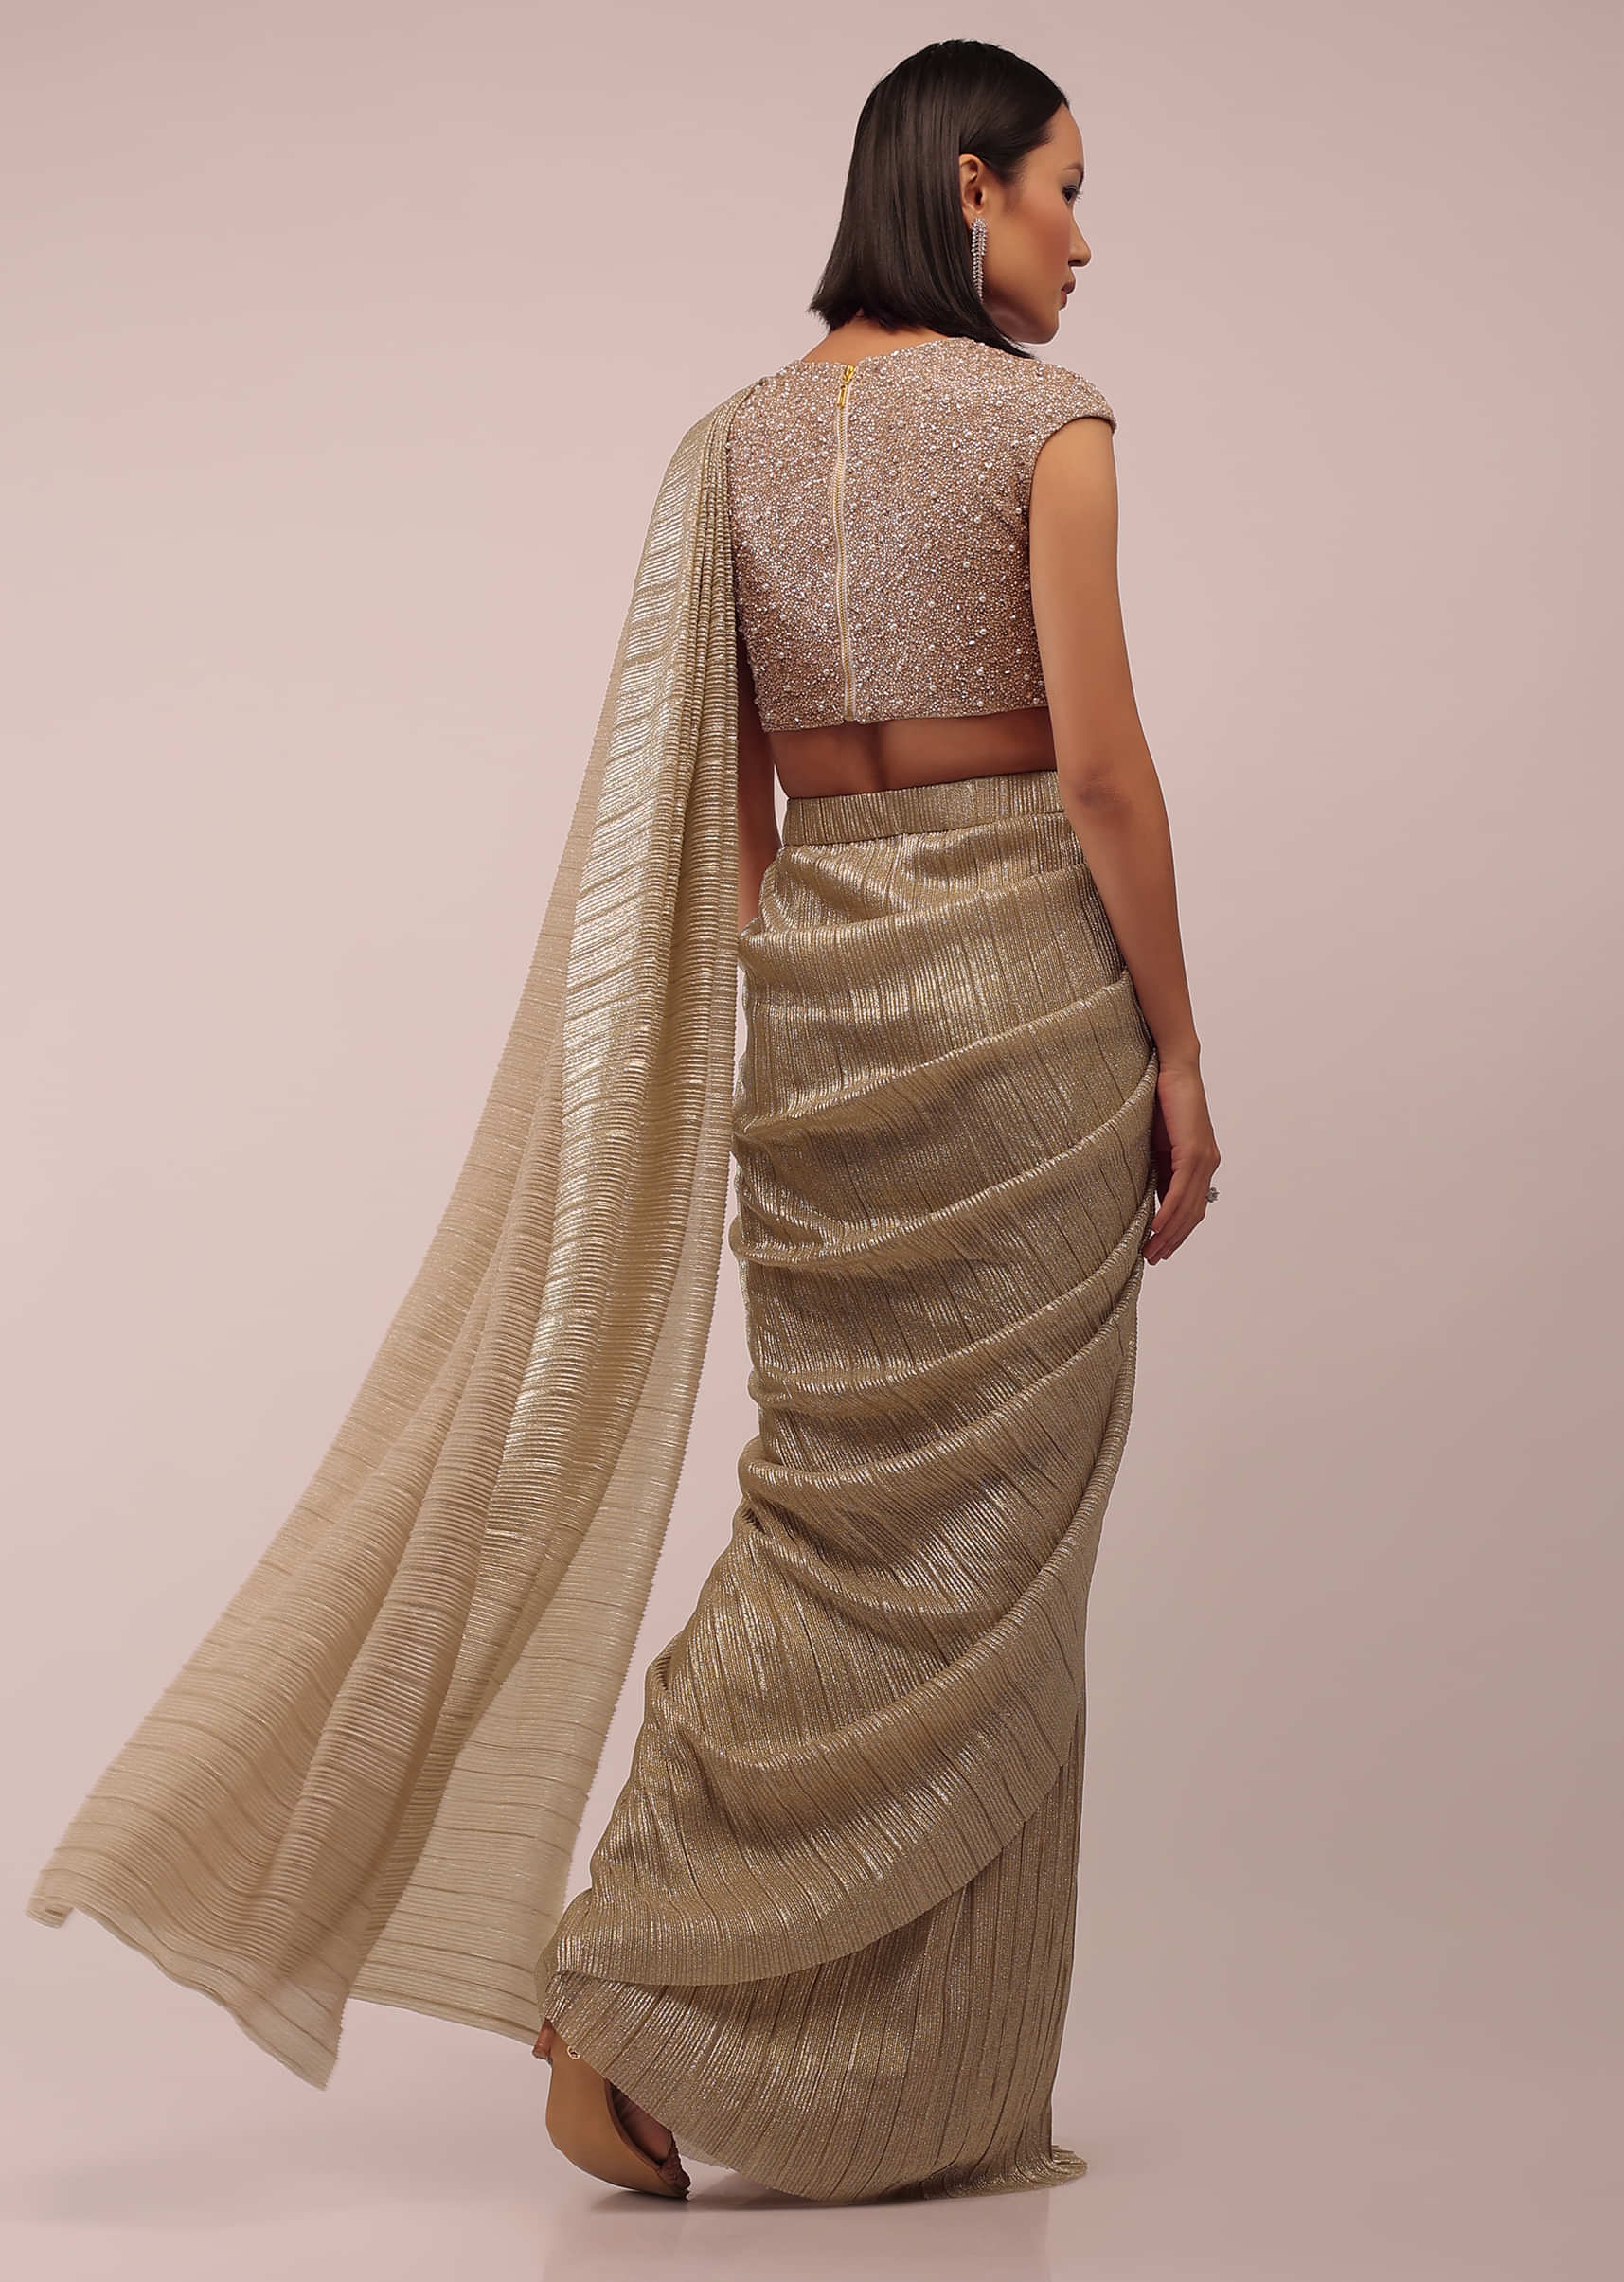 Nomad Shimmer Crush Ready Pleated Saree With A Shimmer Crop Top In 3D Flower, Moti And Cut Dana Embroidery